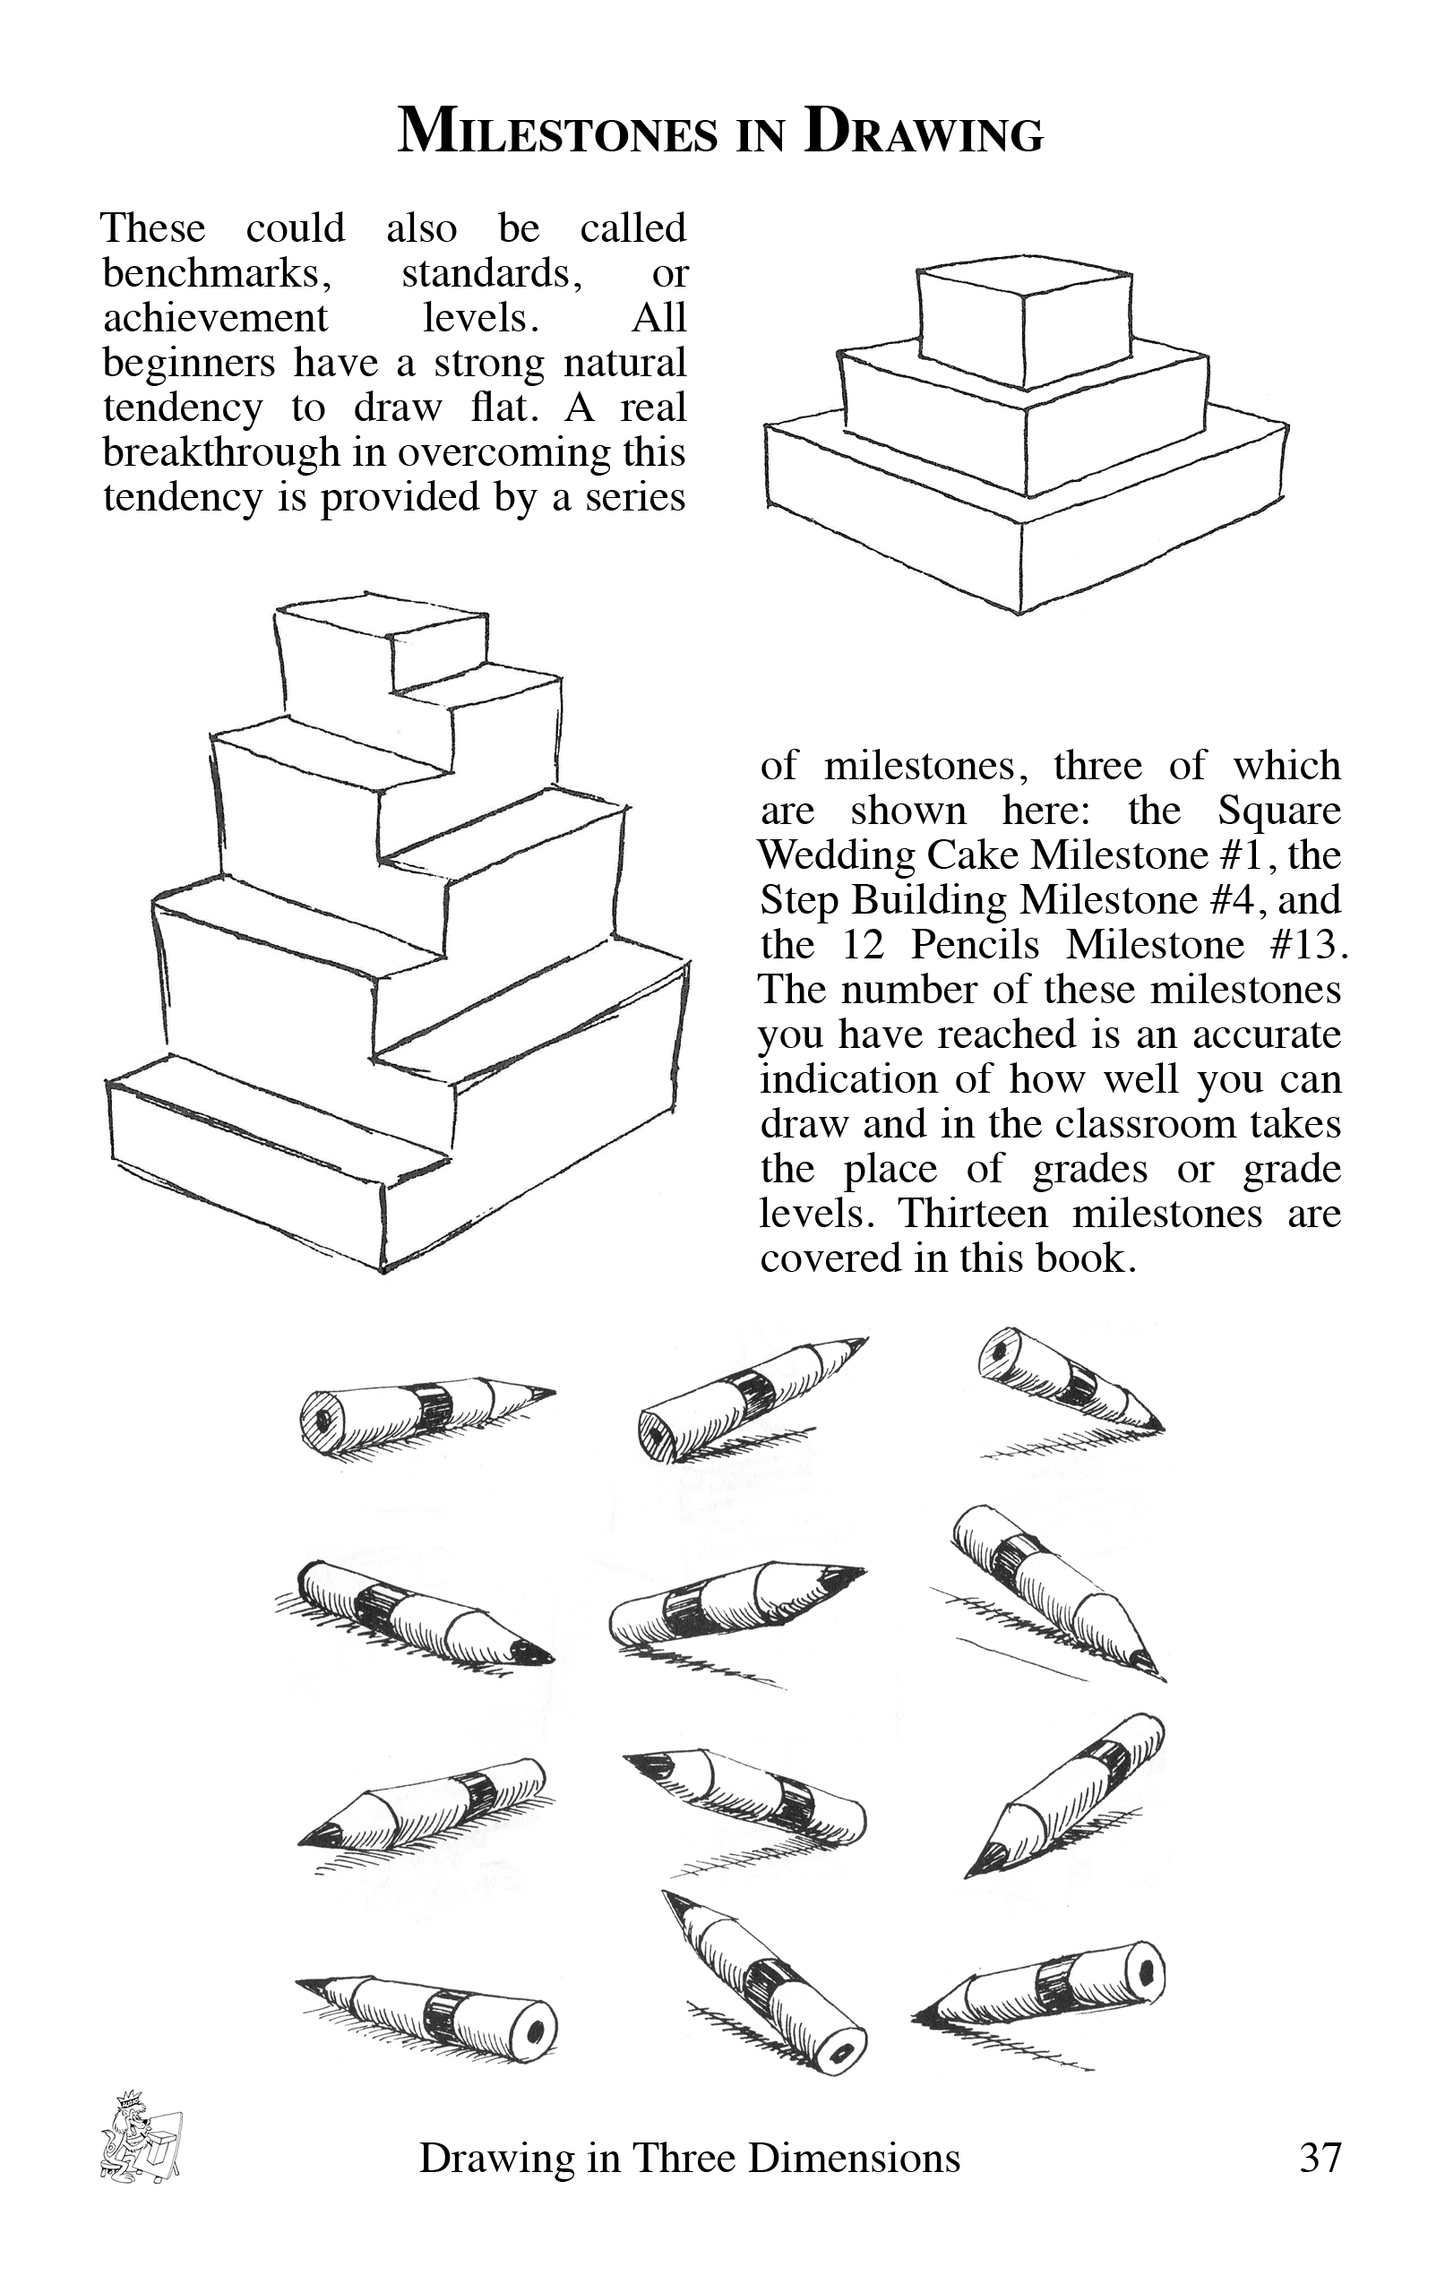 Milestones in Drawing sample page from the book Drawing in Three Dimensions by Bruce McIntyre